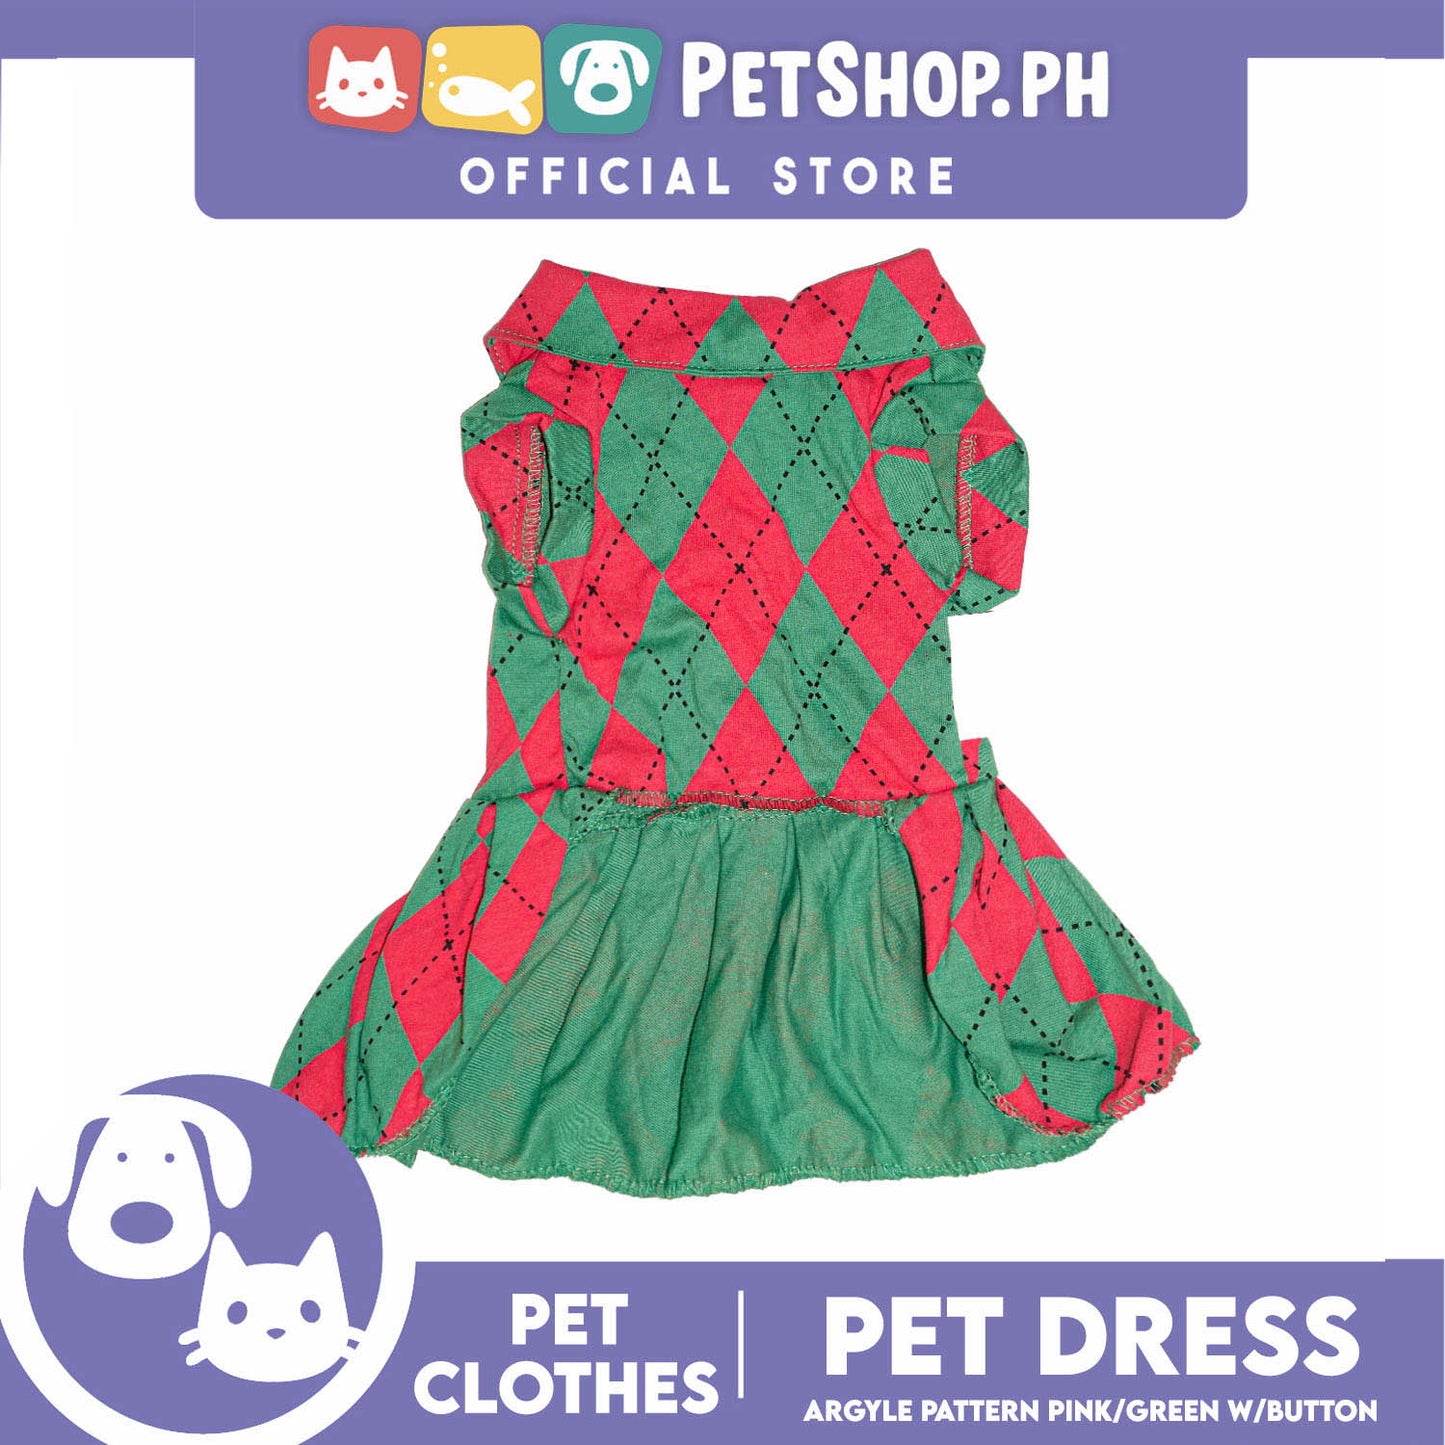 Pet Dress Argyle Pink/Green with Button Dress (Medium) Perfect Fit for Dogs and Cats